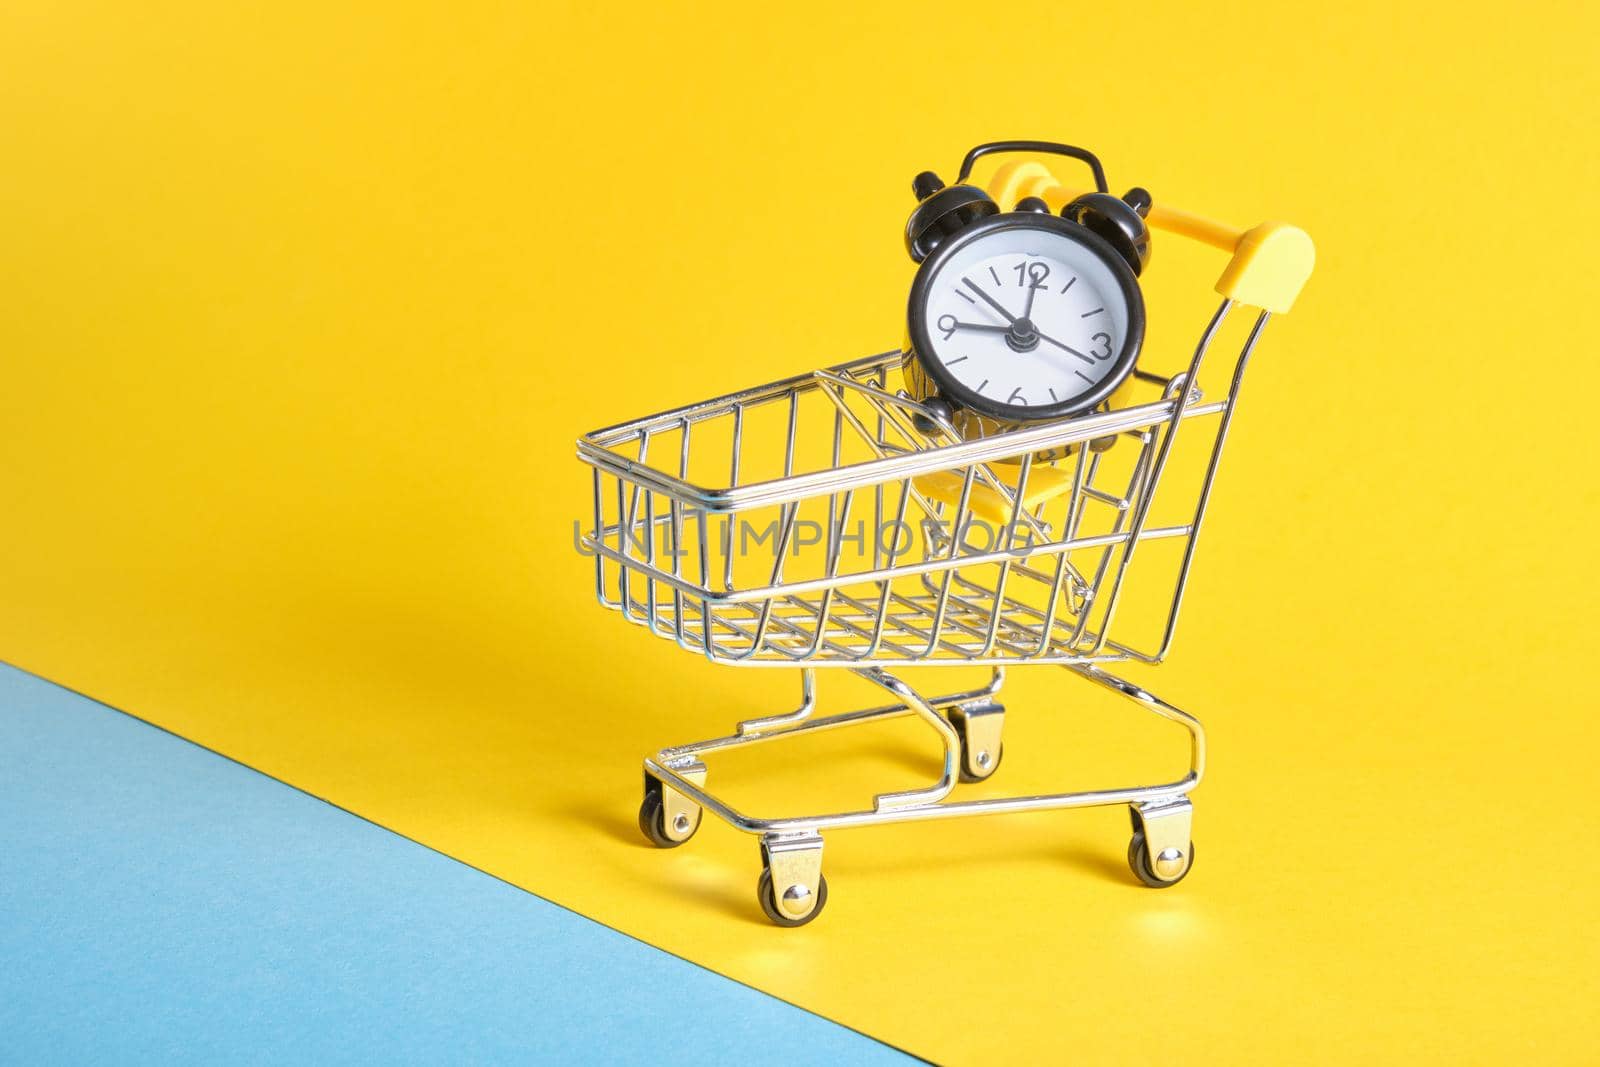 alarm clock in miniature shopping trolley on yellow background copy space